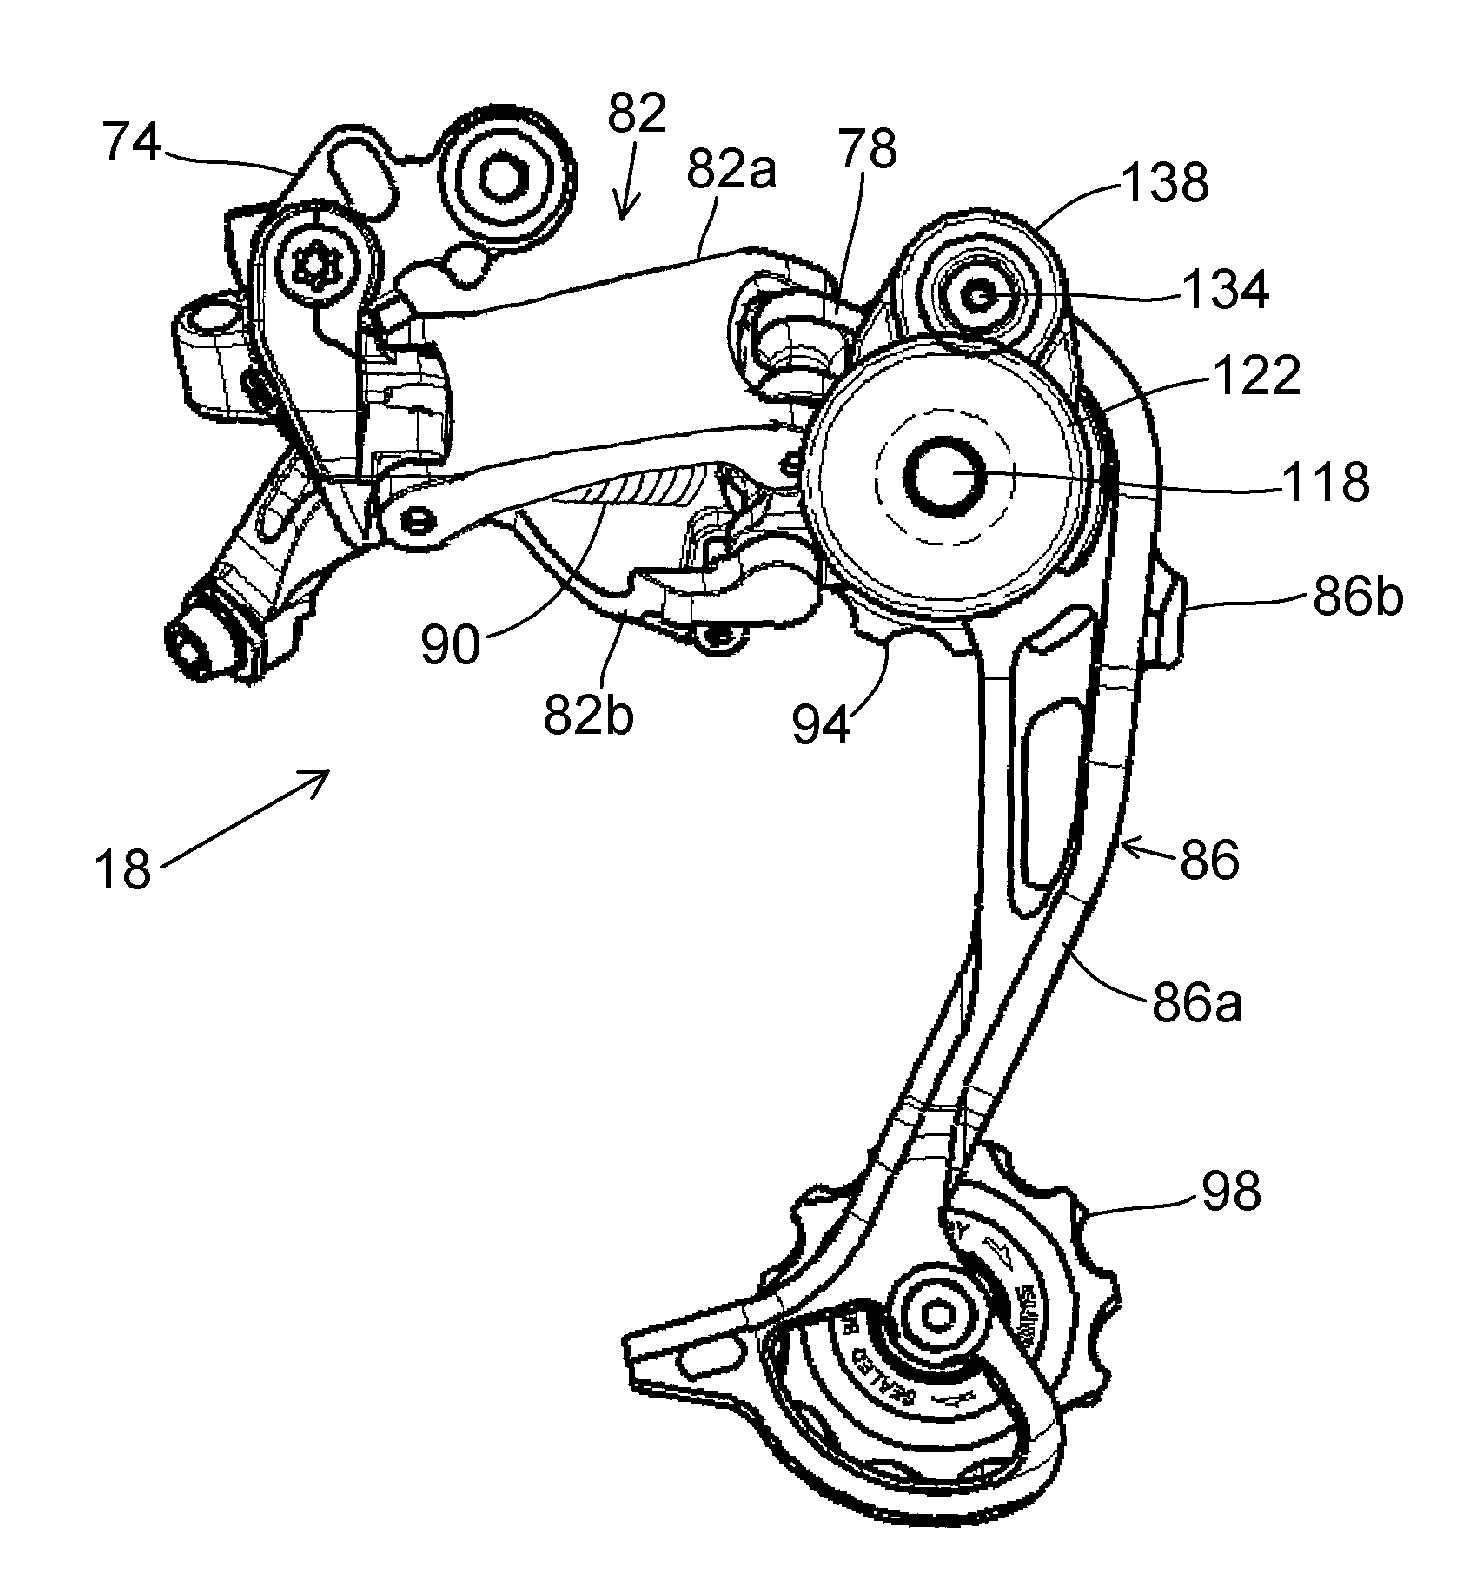 Motion resisting apparatus for a bicycle derailleur